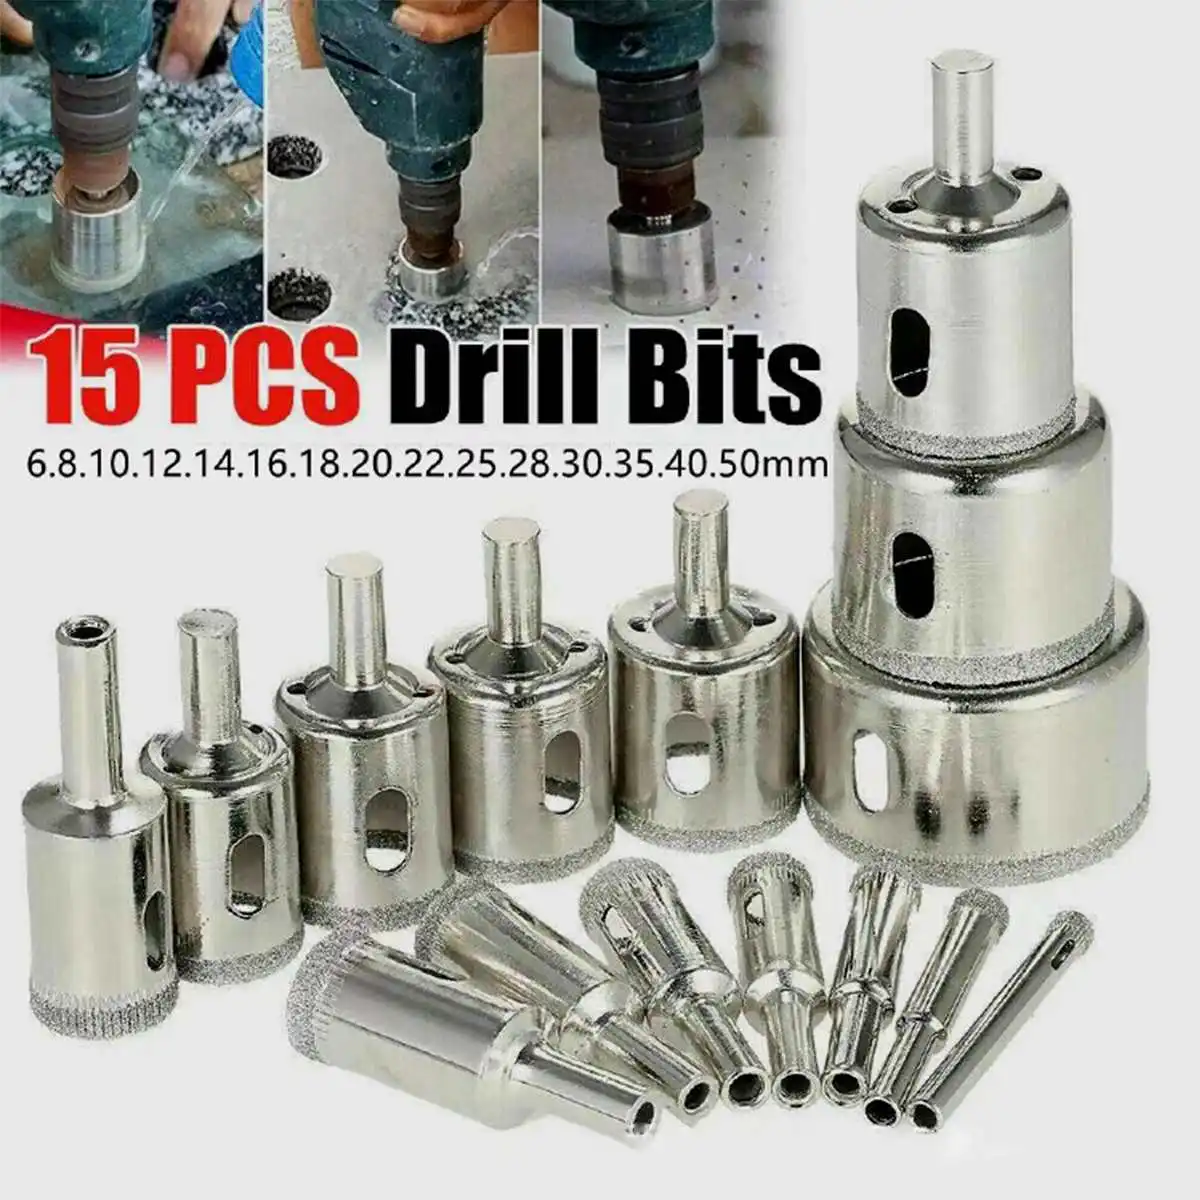 

Vacuum Brazed Diamond Drilling Core Bits 3mm-50mm M14 Connection Drill Bits Hole Saw Granite For Ceramic Tile Marble Stone Glass